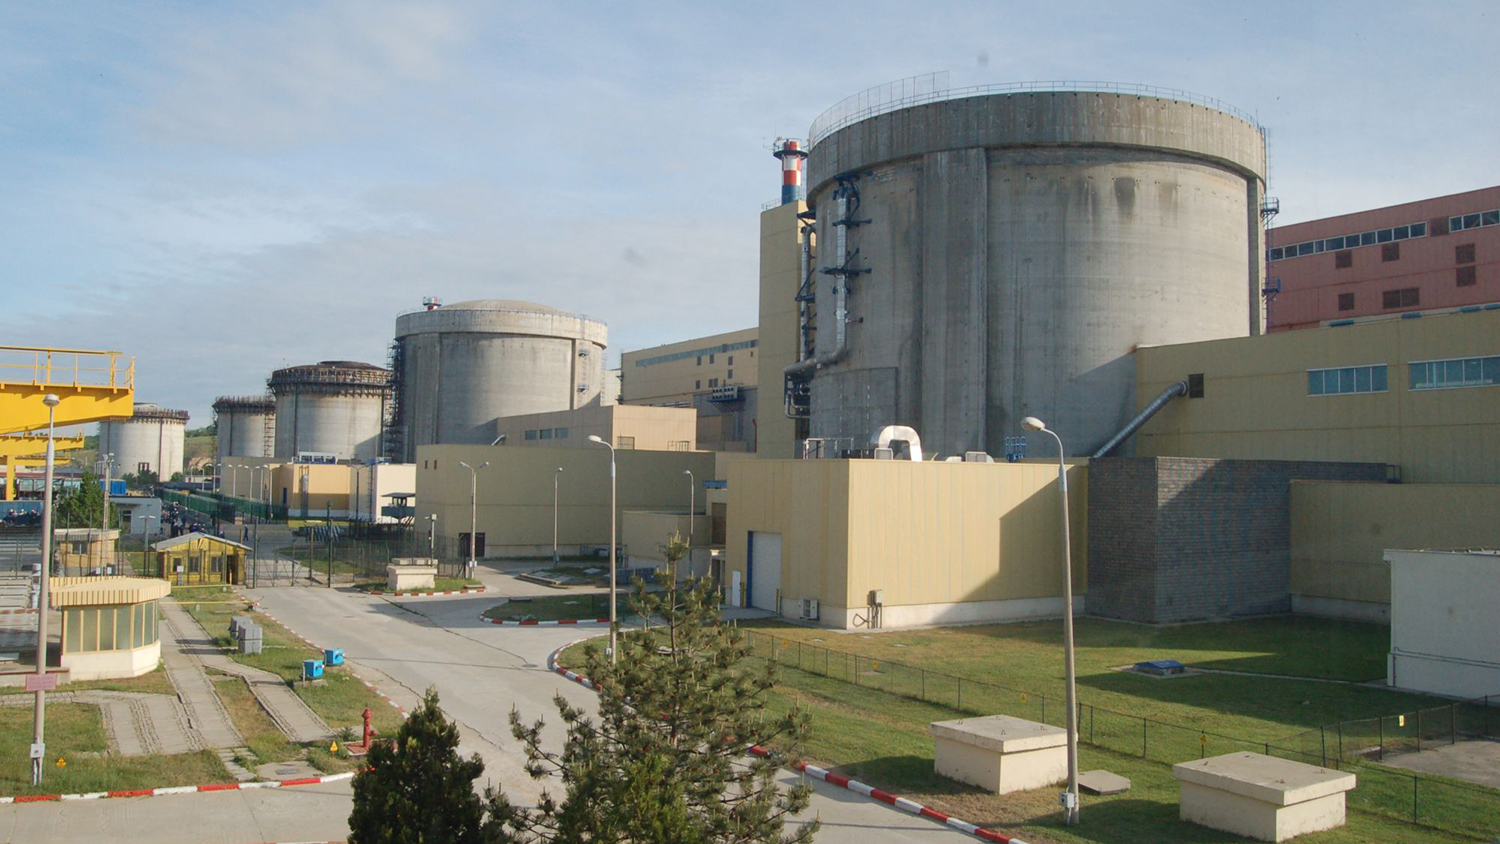 SNC-Lavalin nuclear contract